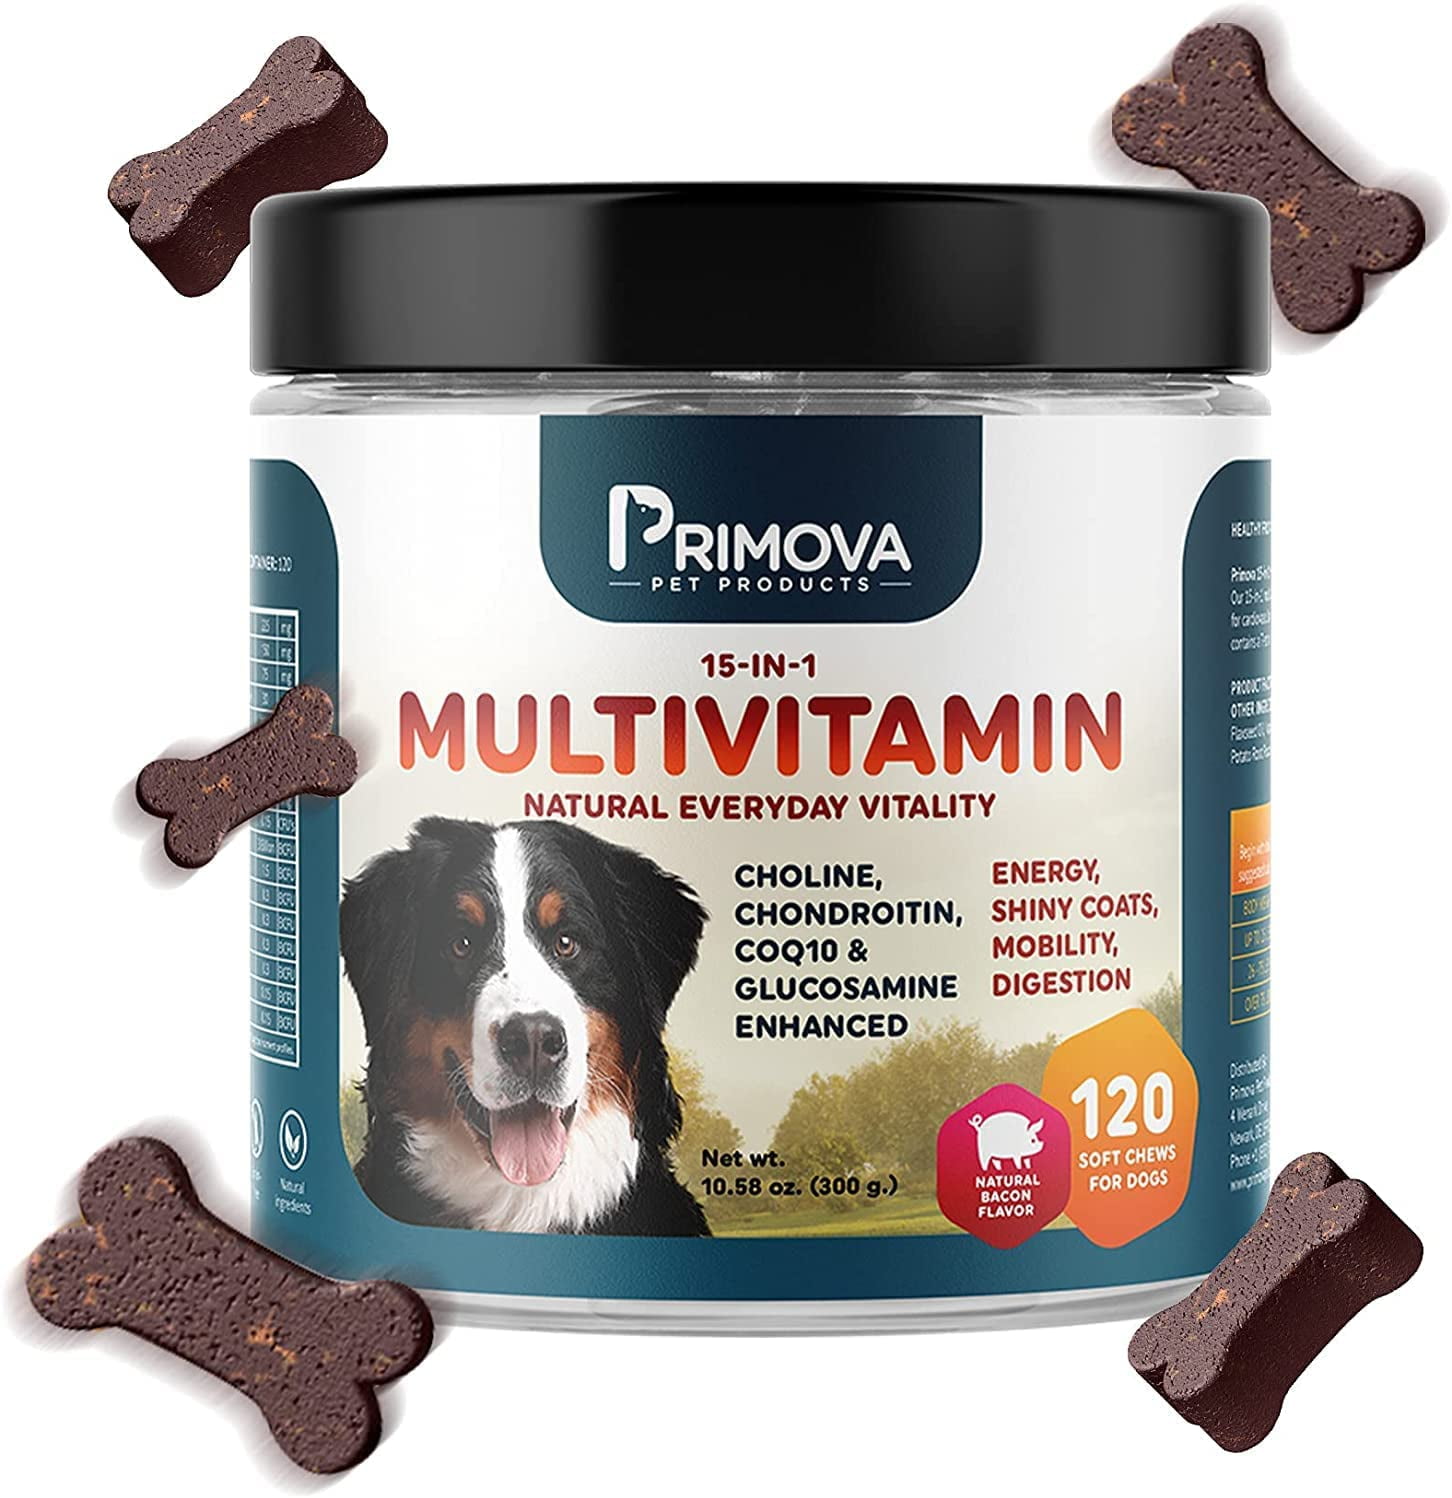 what is msm in dog supplements